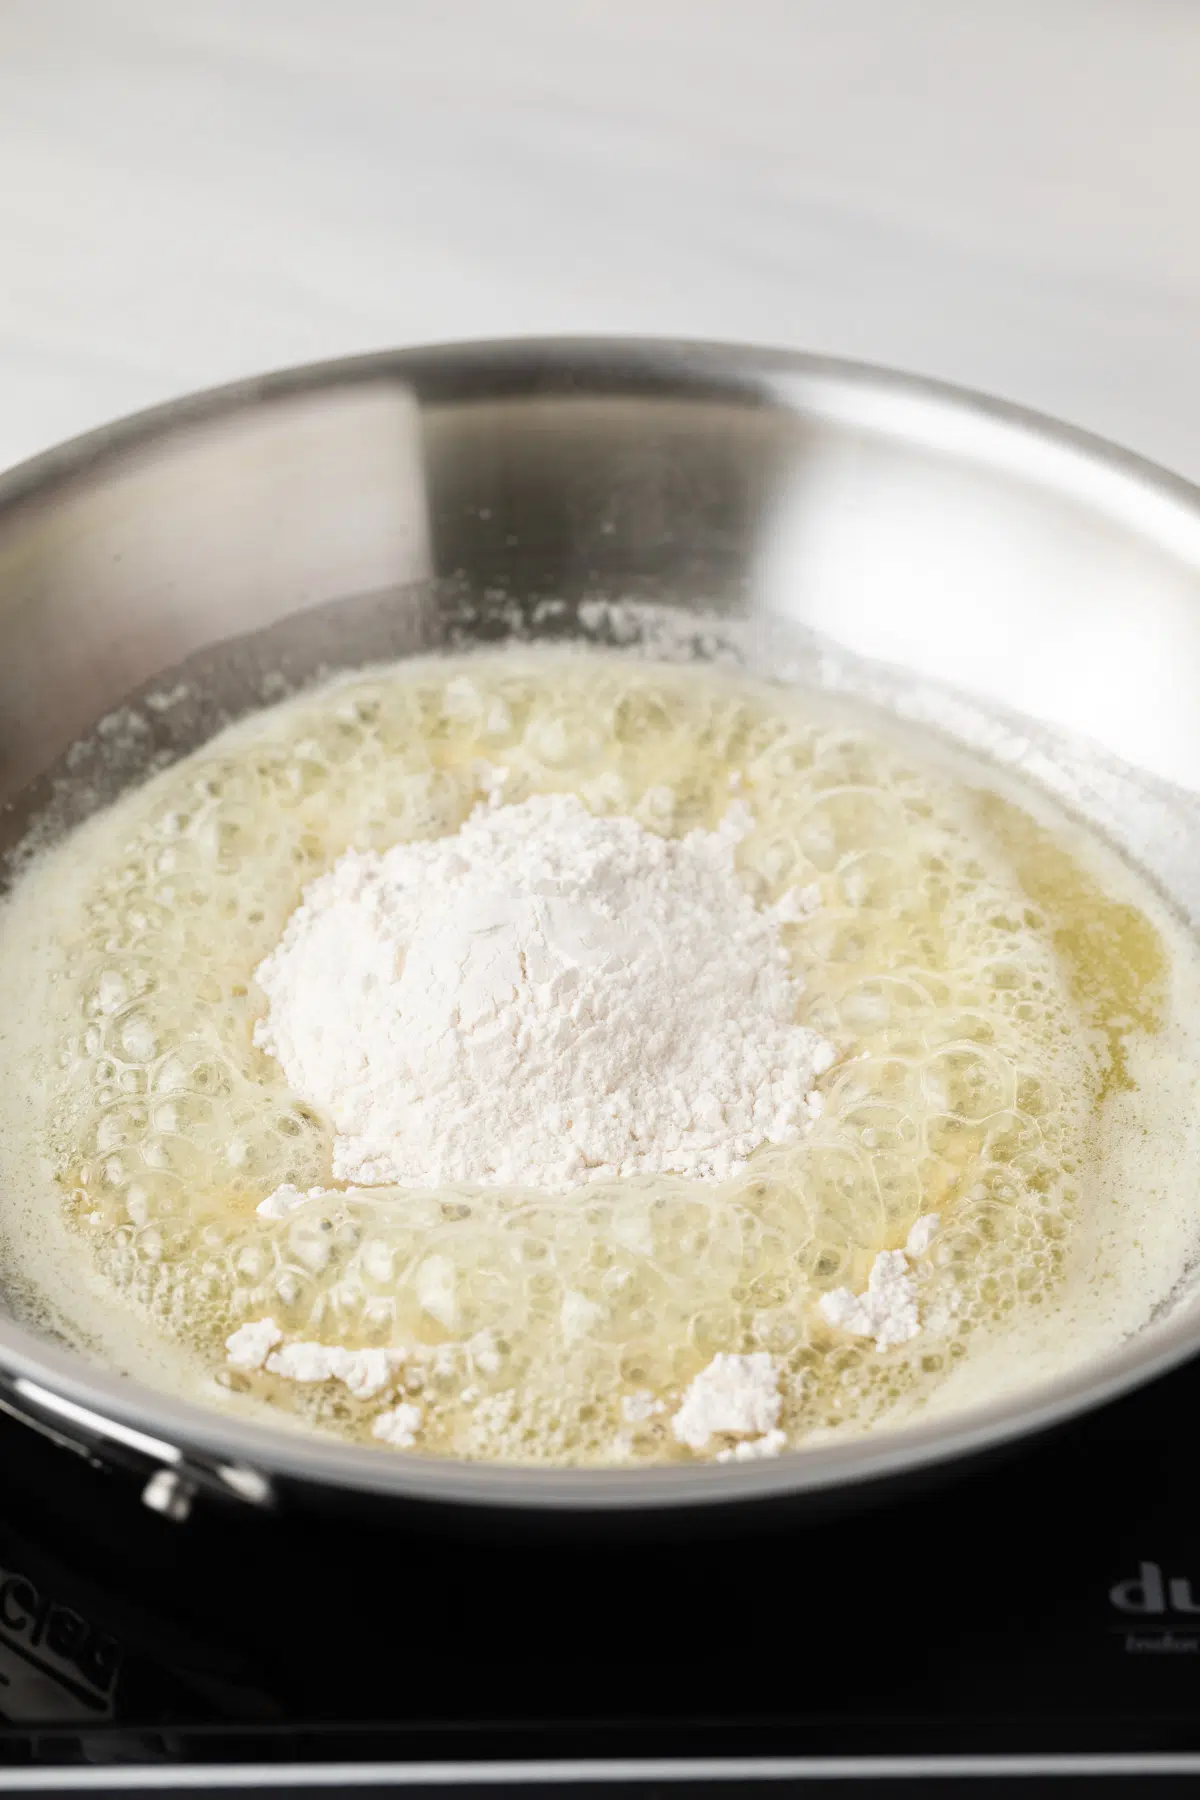 Flour in melted butter in pan.